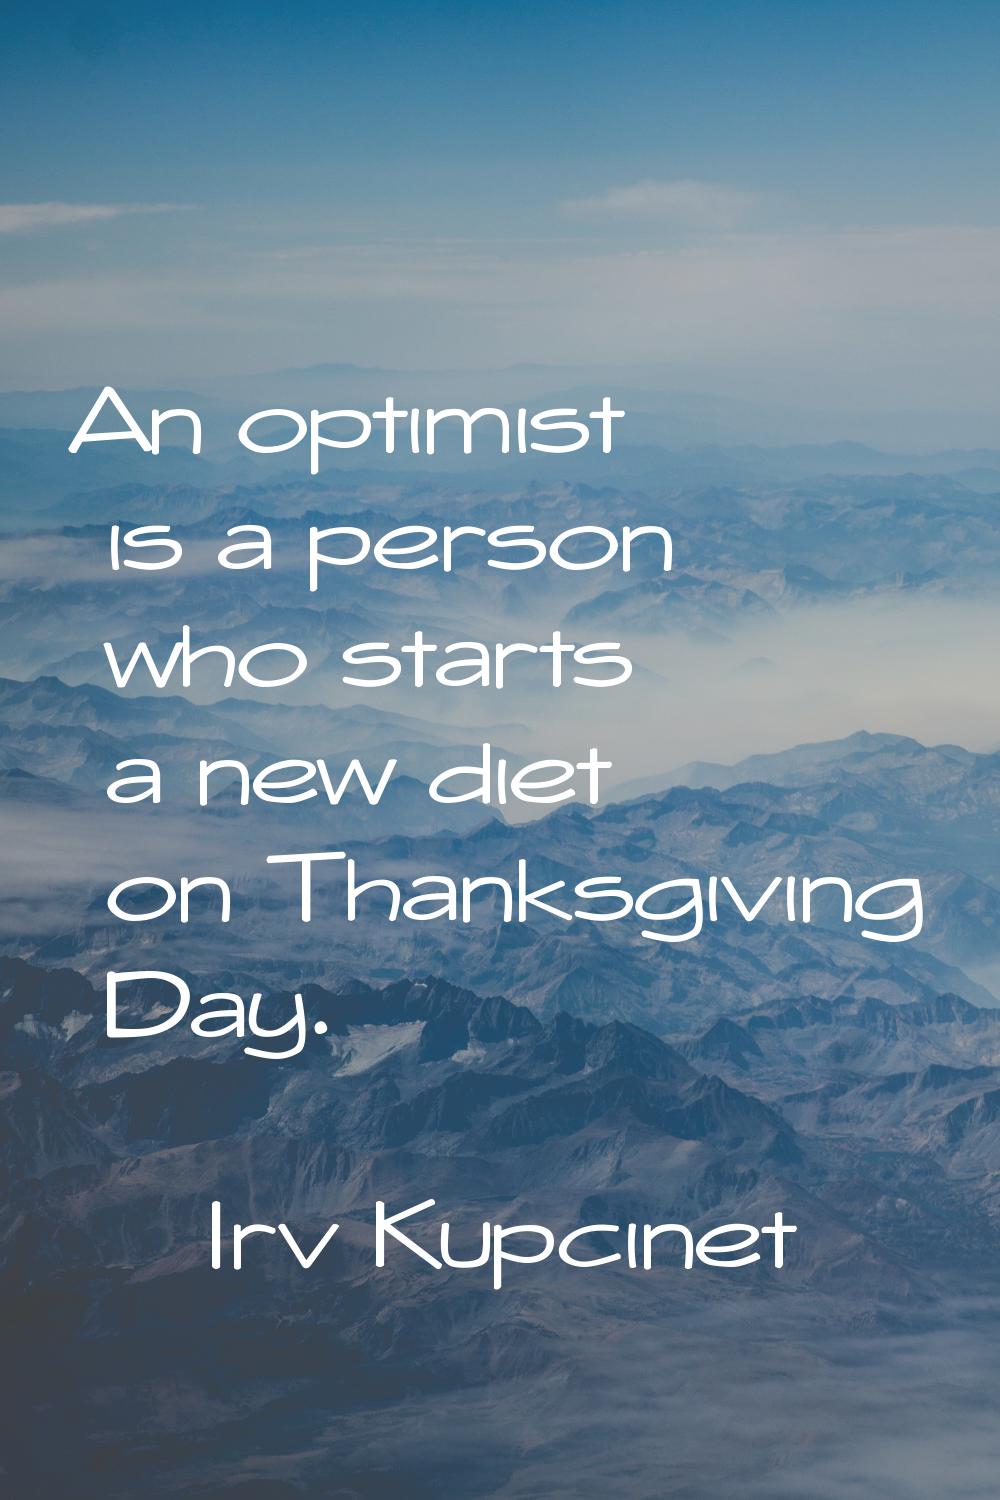 An optimist is a person who starts a new diet on Thanksgiving Day.